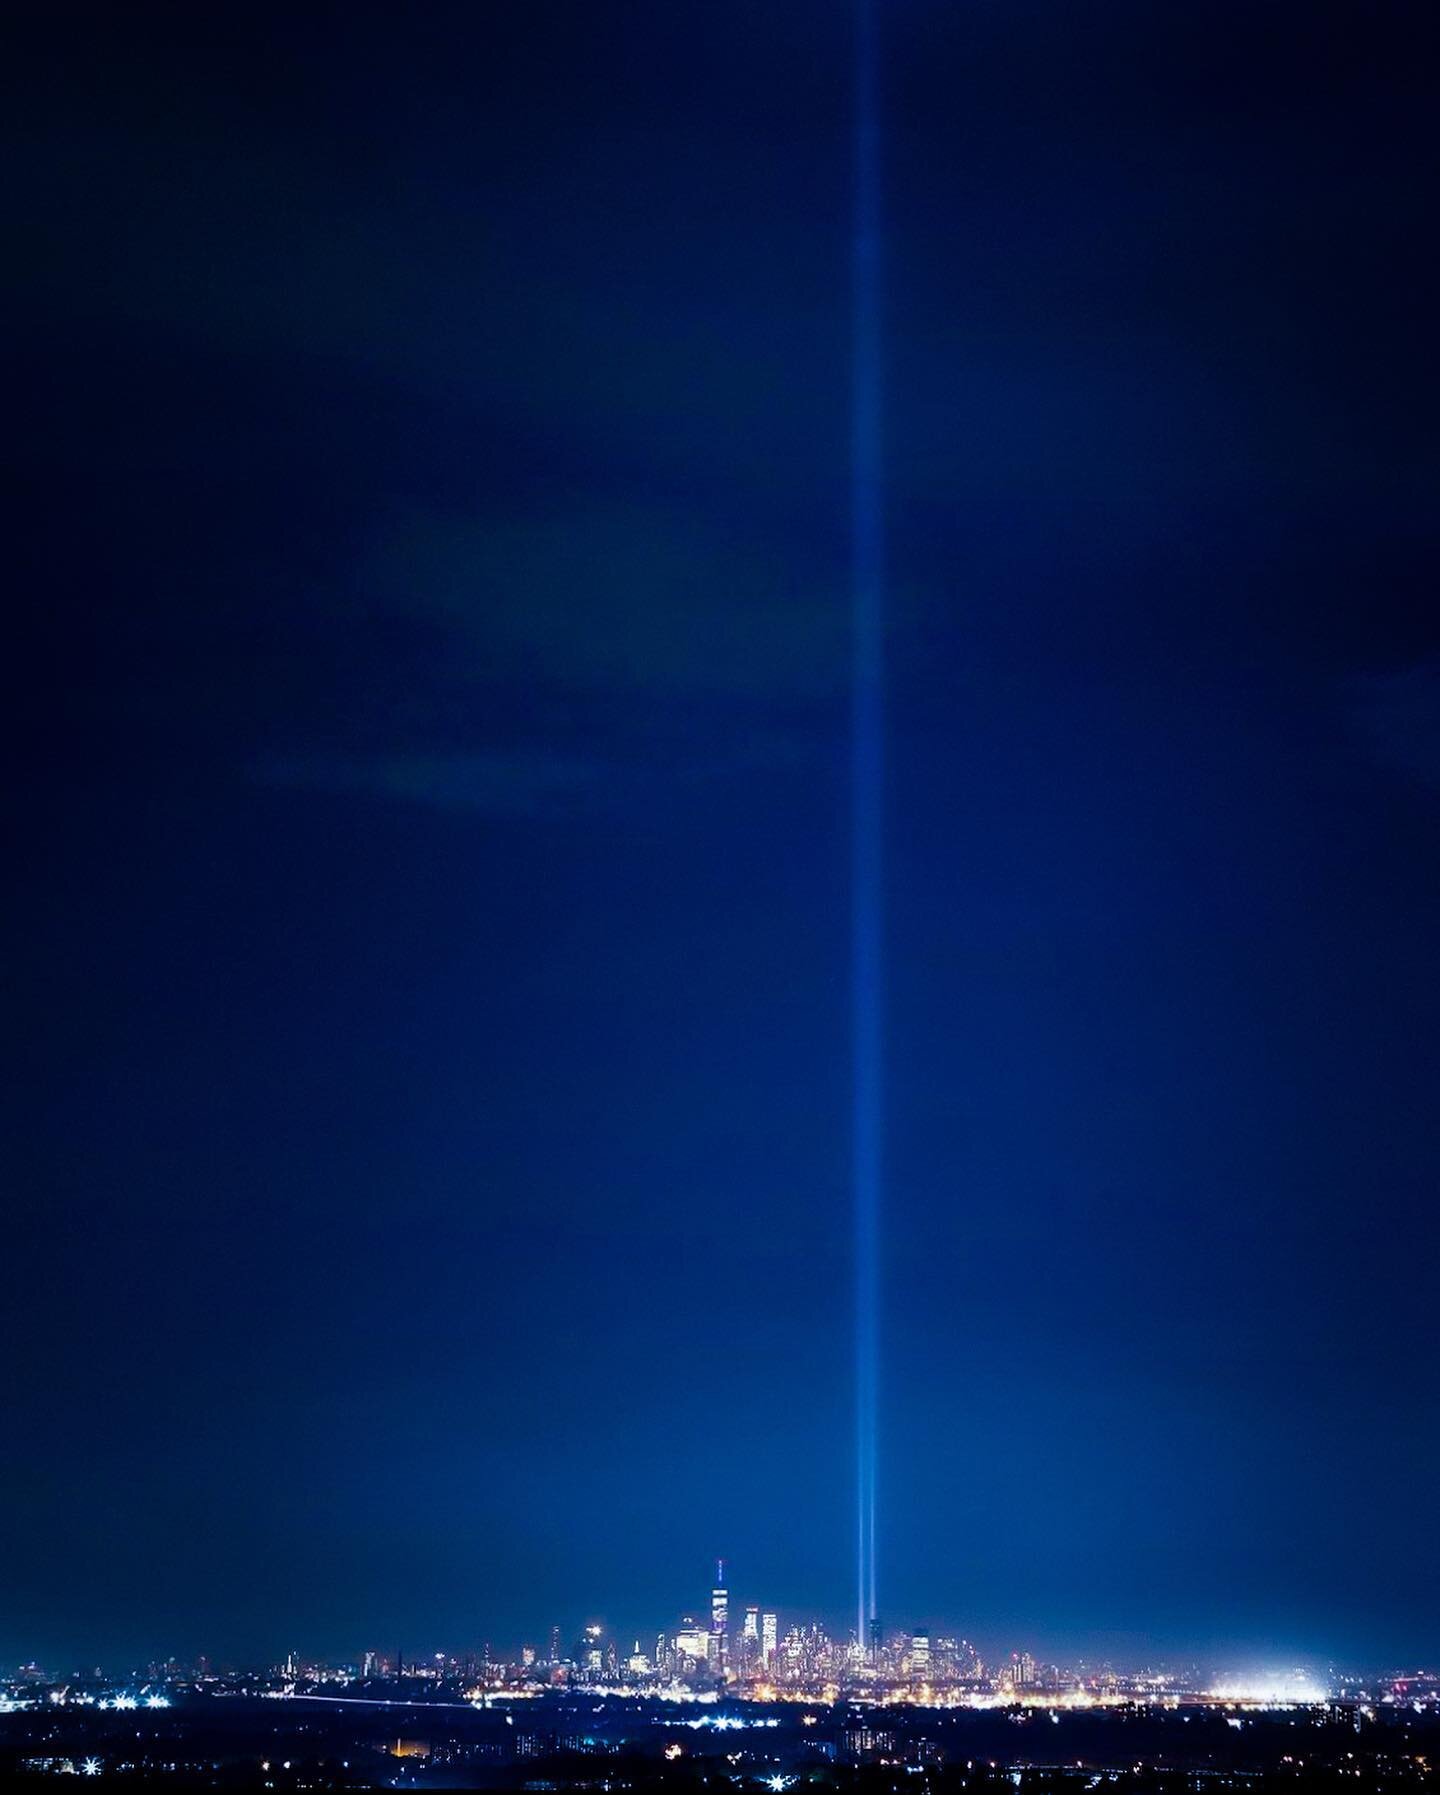 It didn&rsquo;t occur to me until I was boarding my plane from Doha last night that I would be flying into New York on the morning September 11th, 2023. Just in time in fact to observe a moment of silence with all of JFK. Vivid memories of that day c